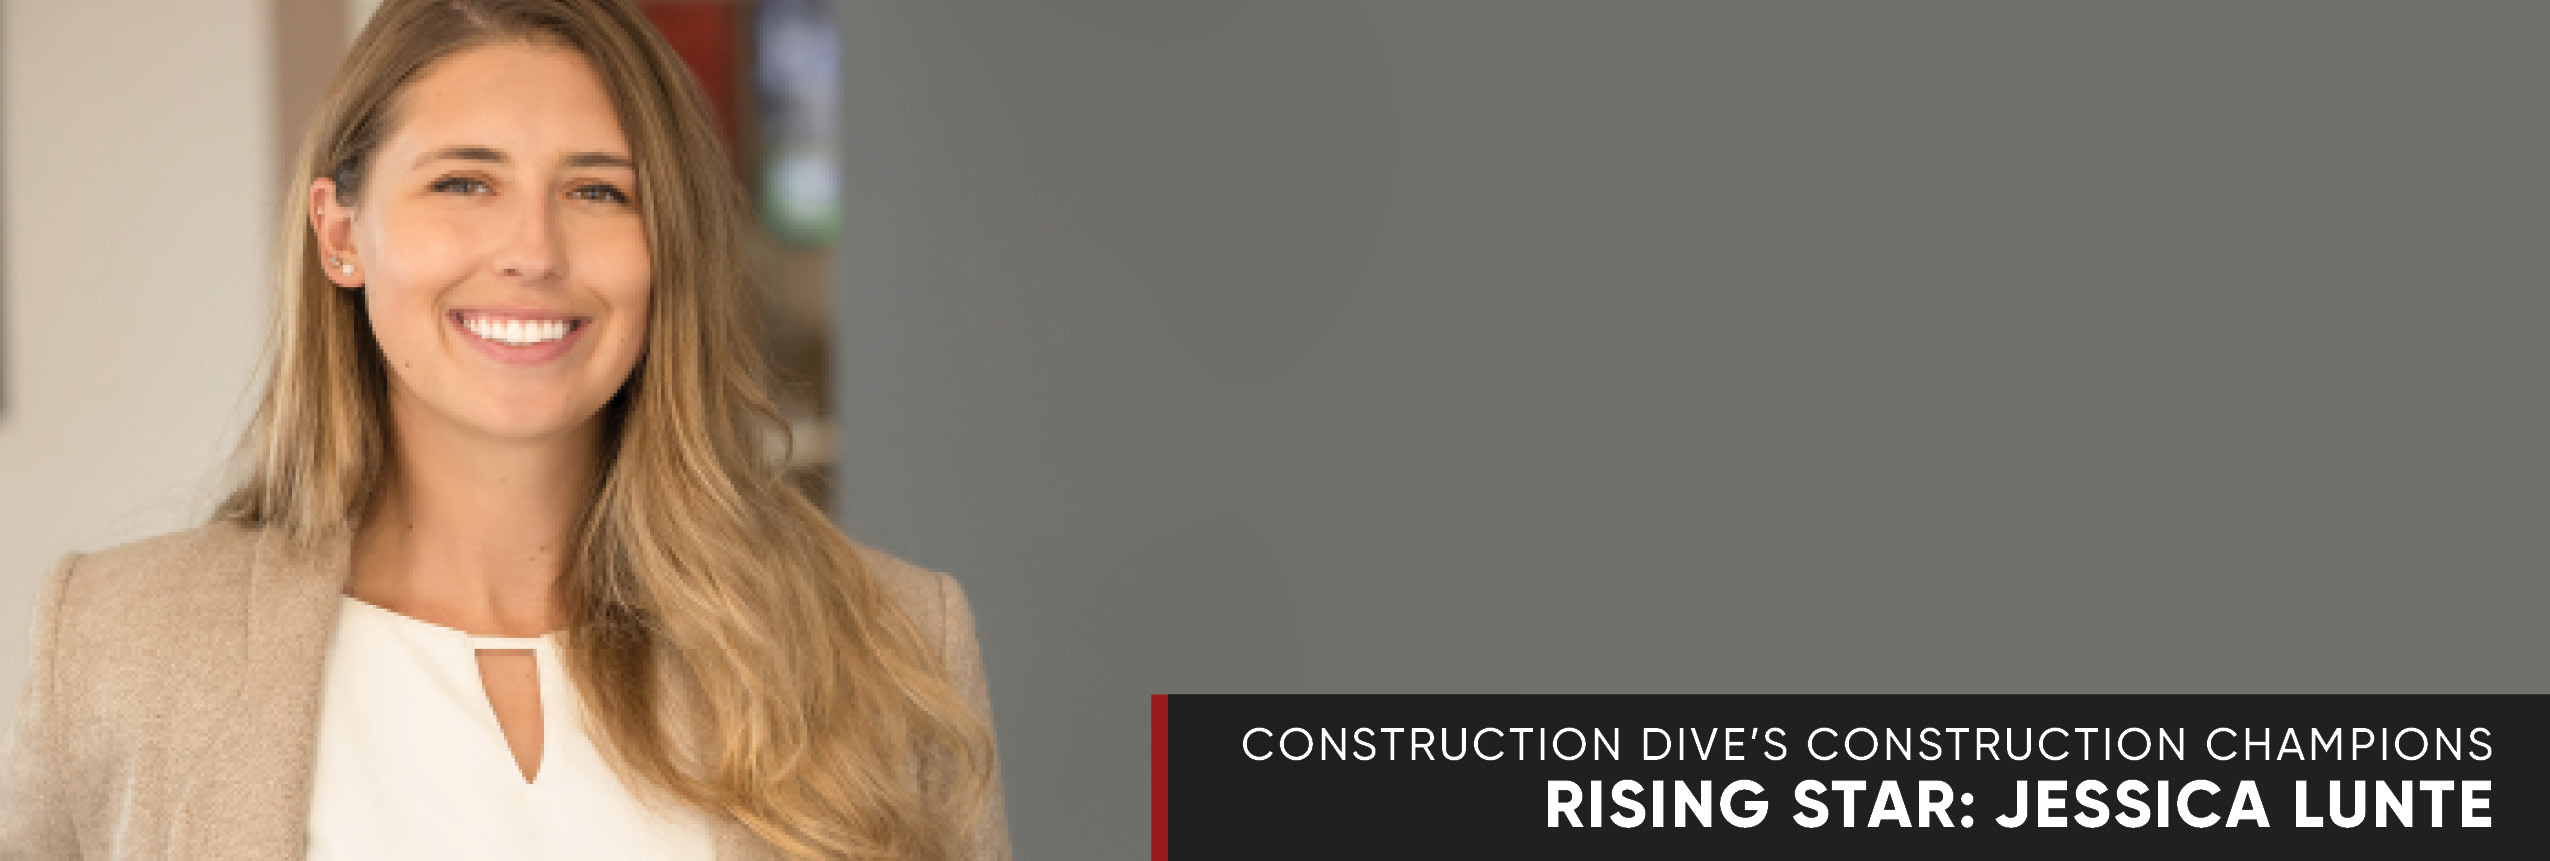 Jessica Lunte: Construction Dive's Construction Champions Rising Star